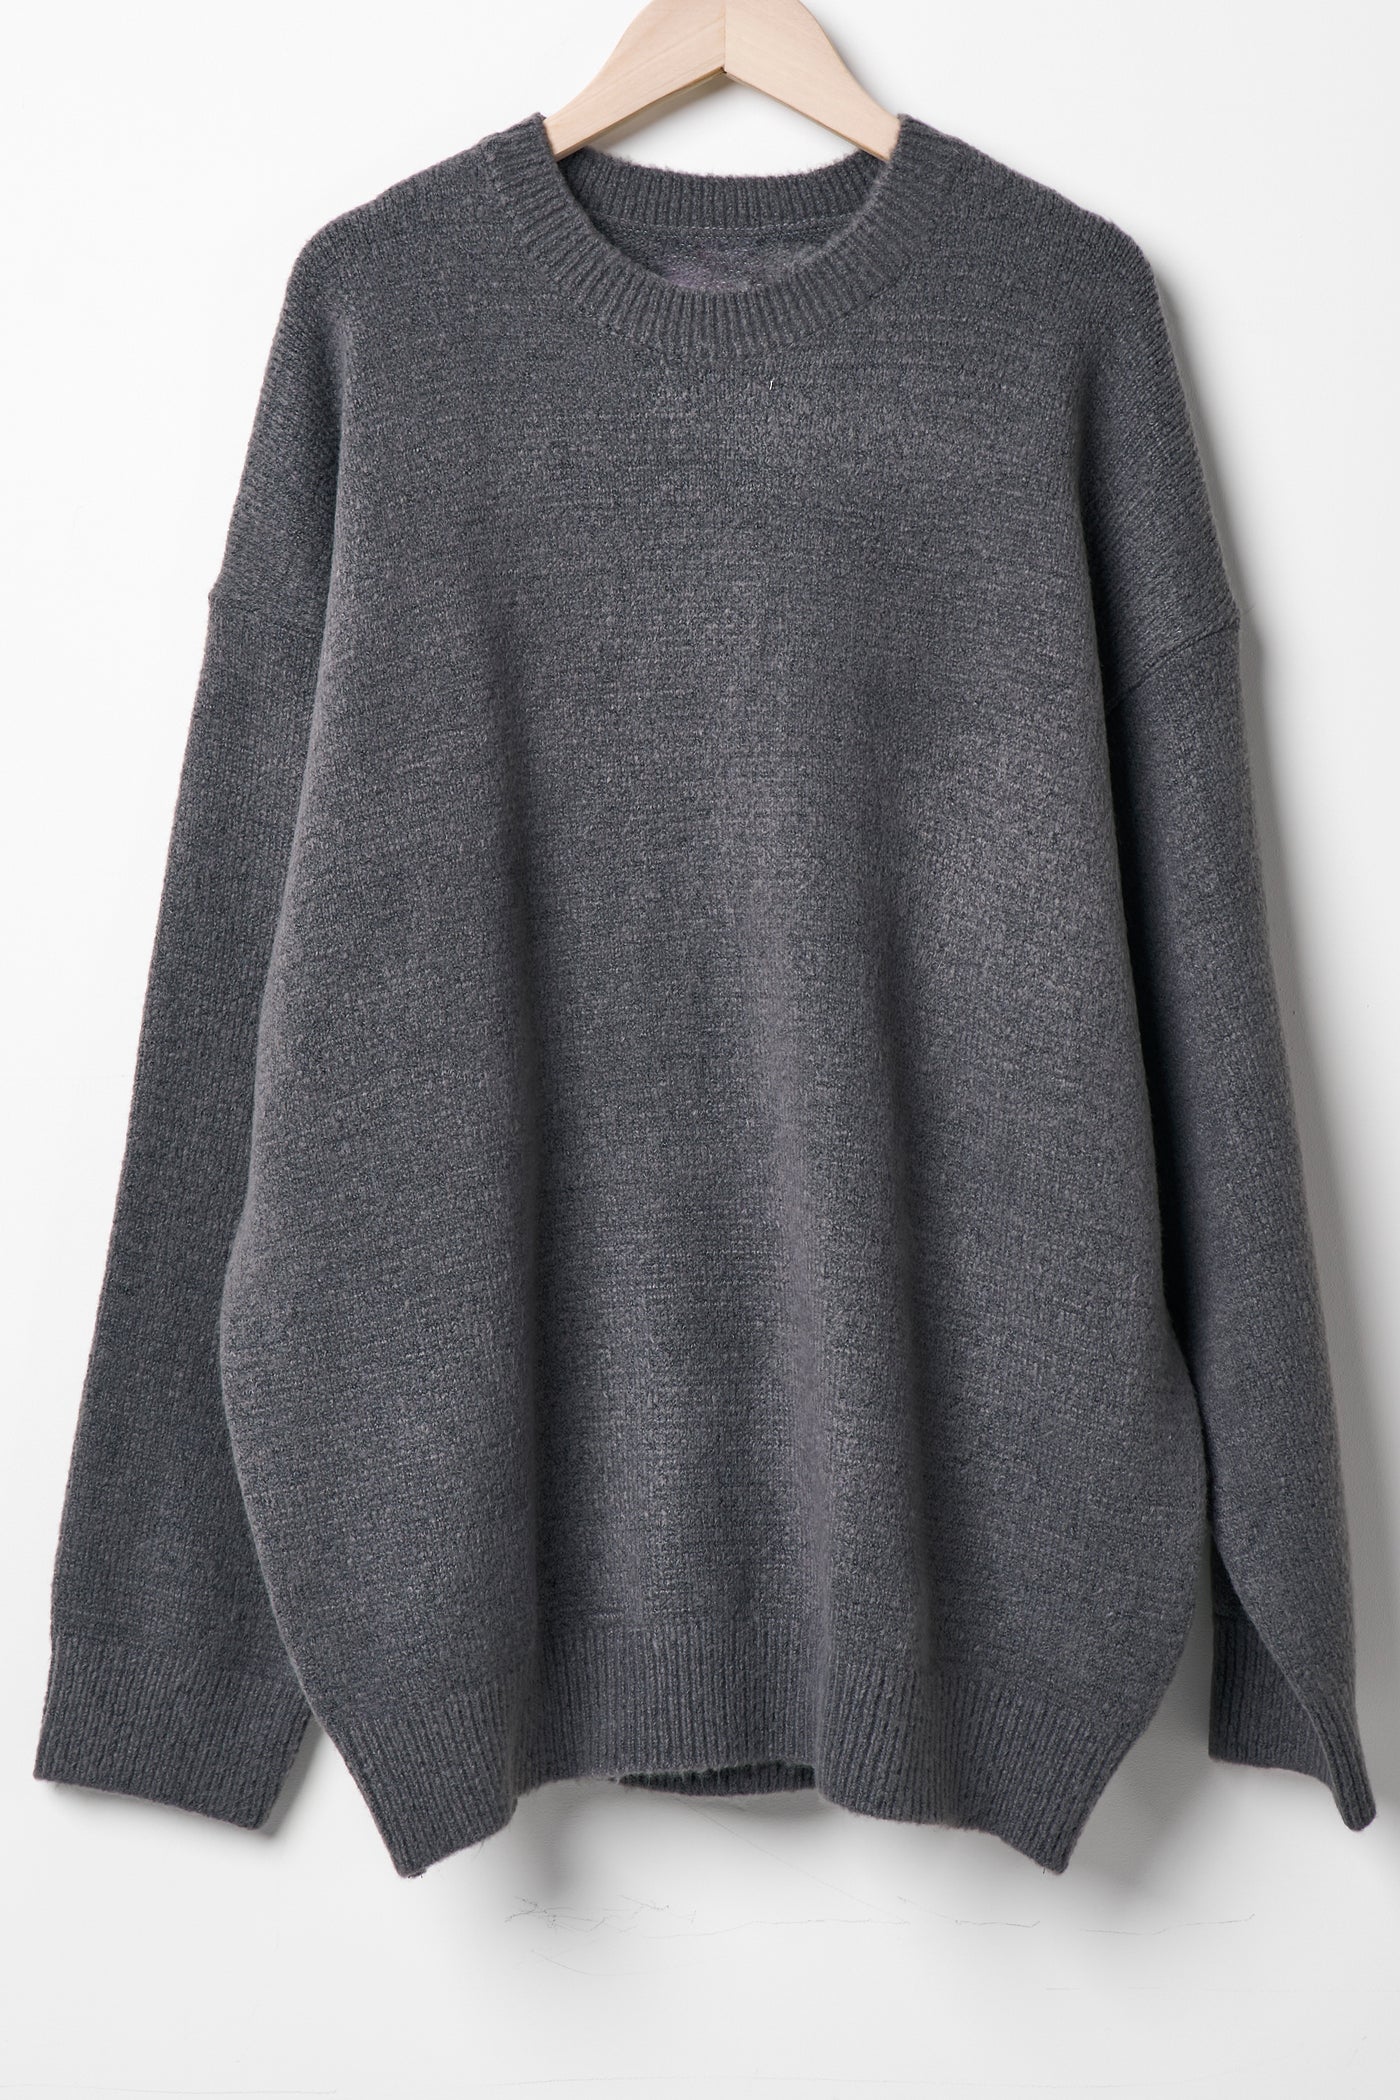 storets.com Nora Relaxed Fit Pullover